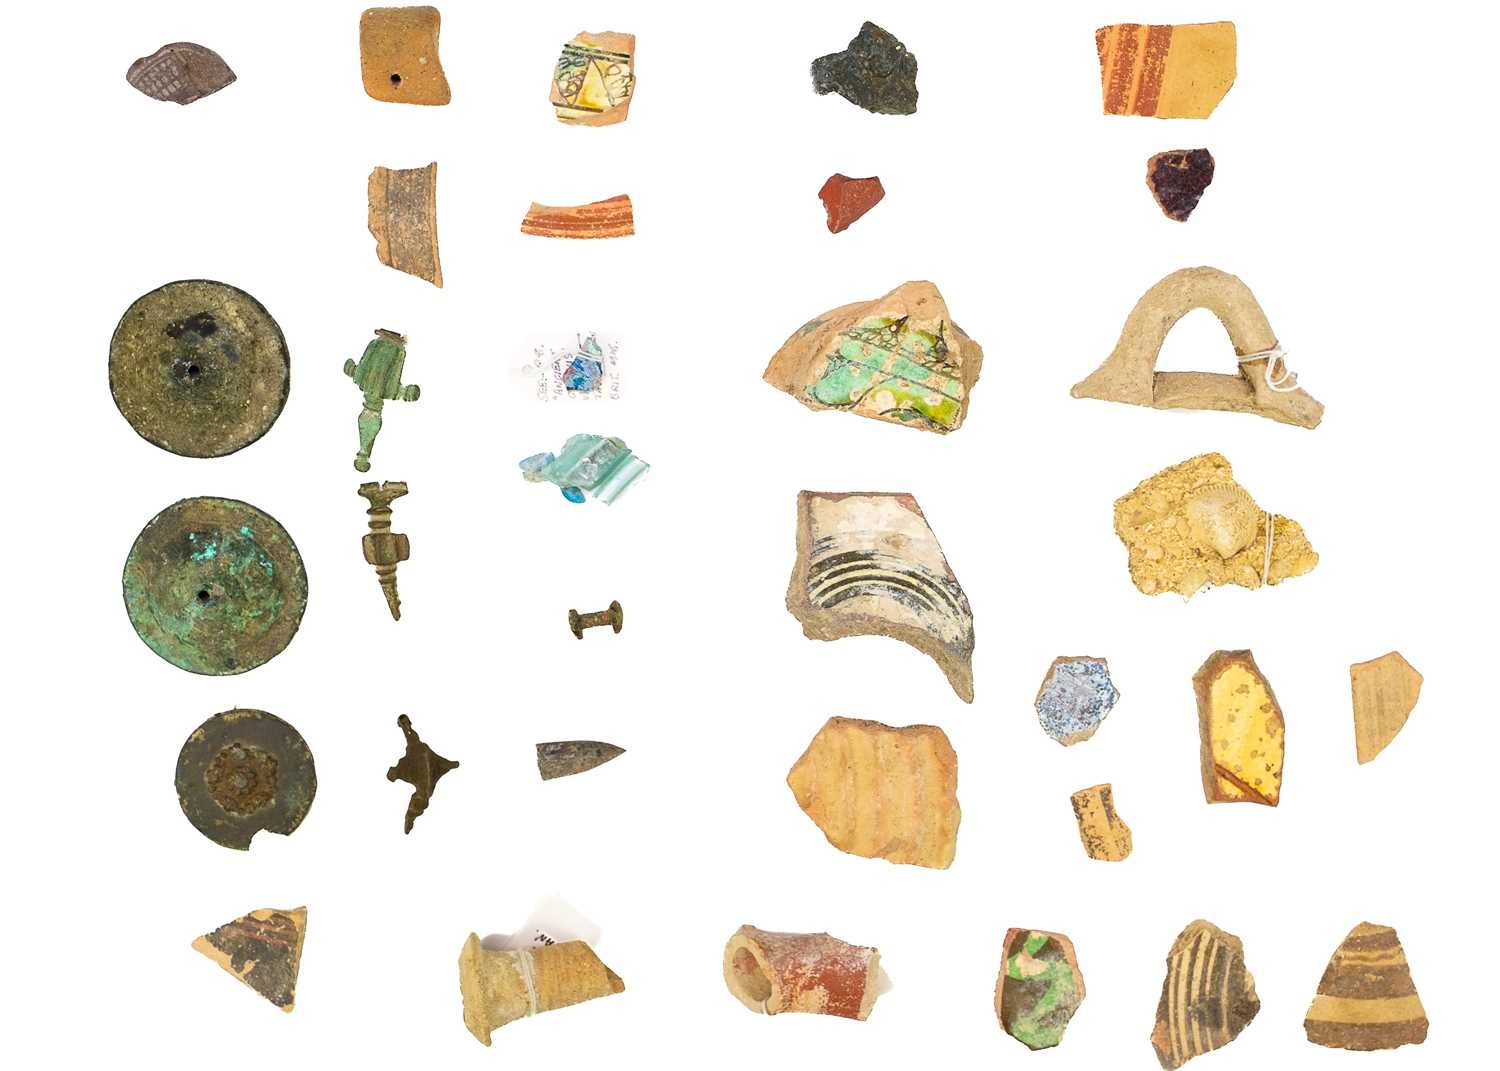 A group of Cypriot pottery shards and glass fragments.